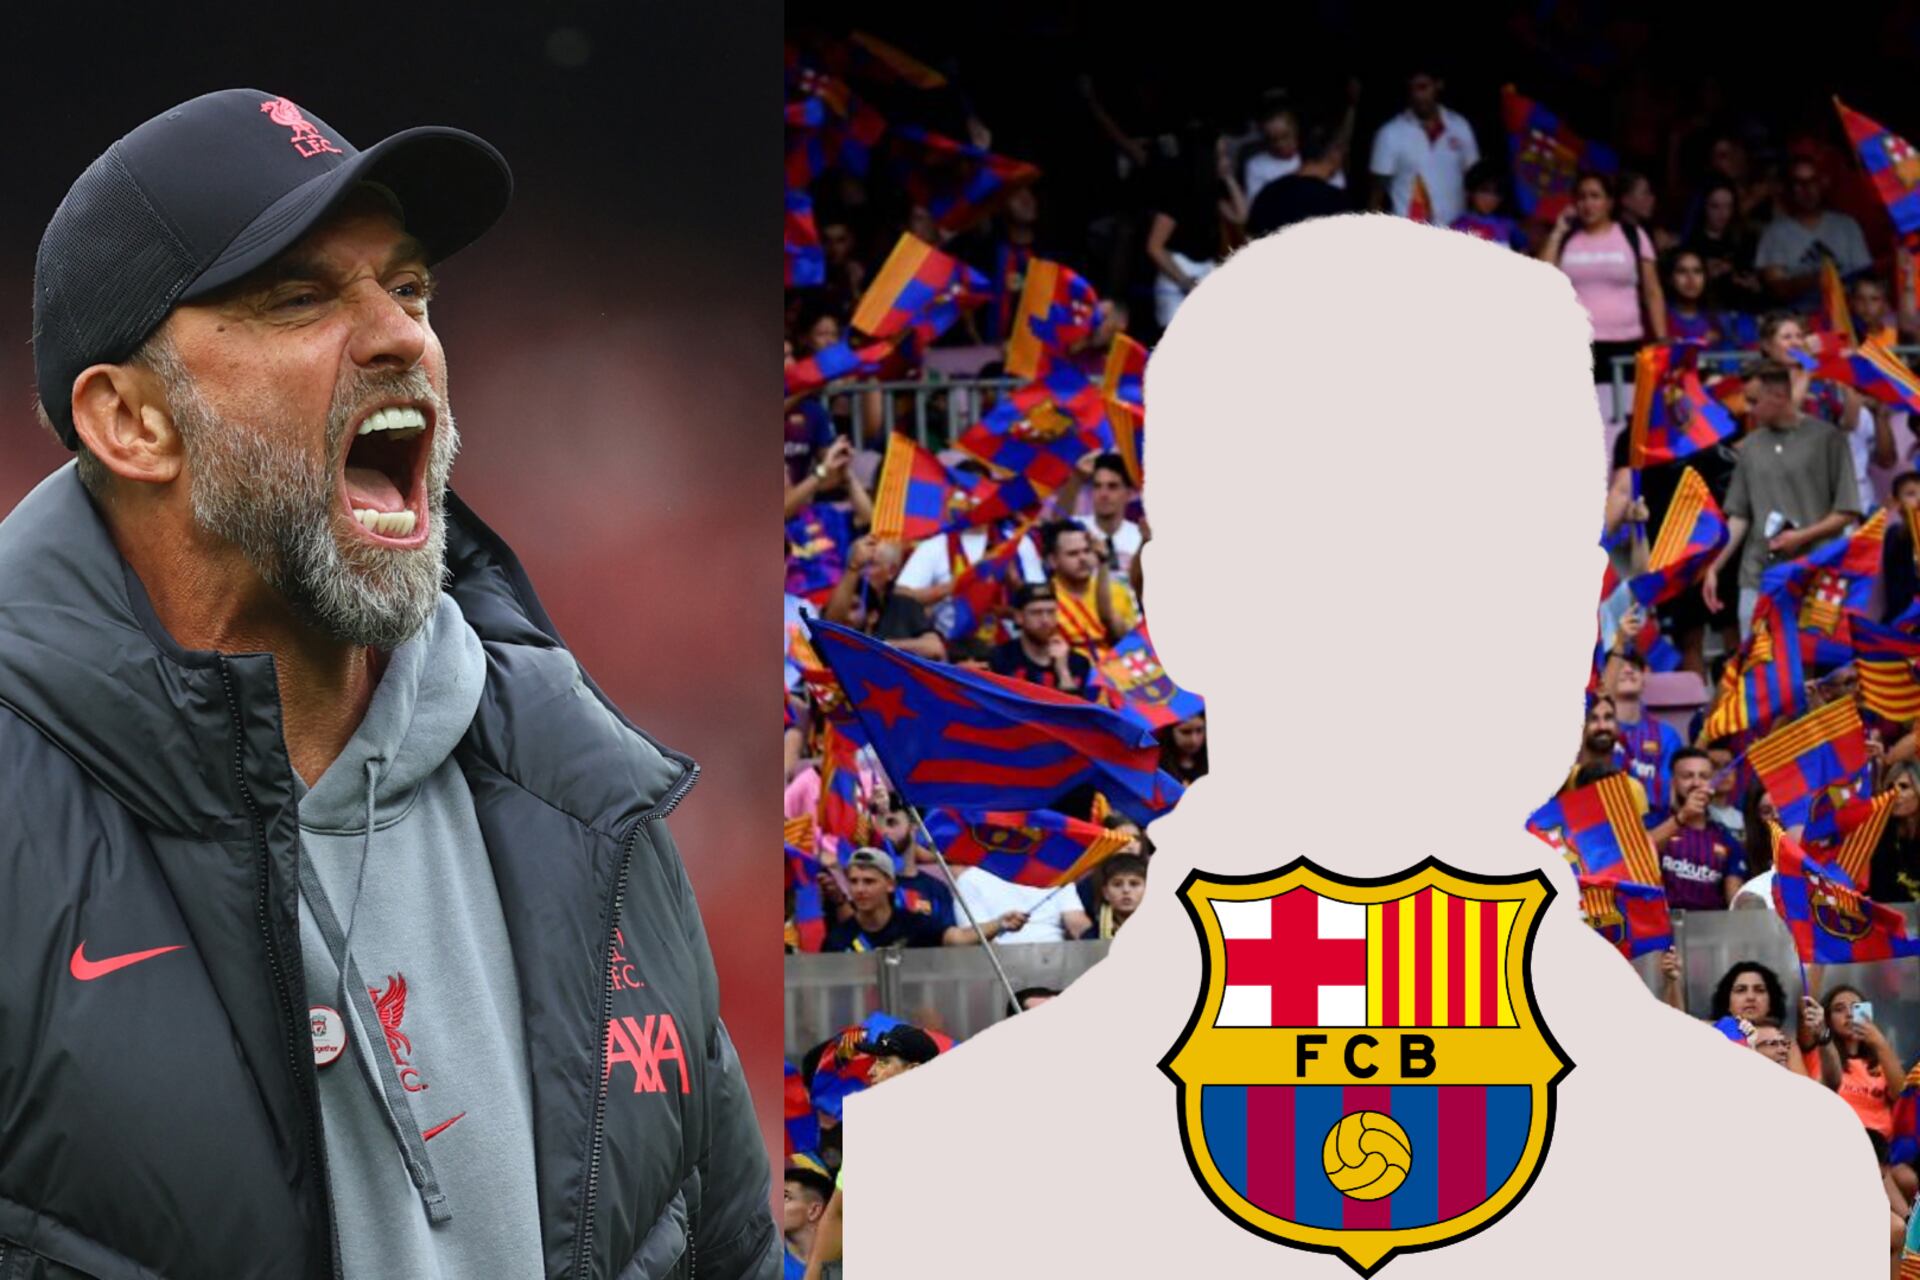 Not Klopp, the Premier League coach FC Barcelona contacted who could coach them